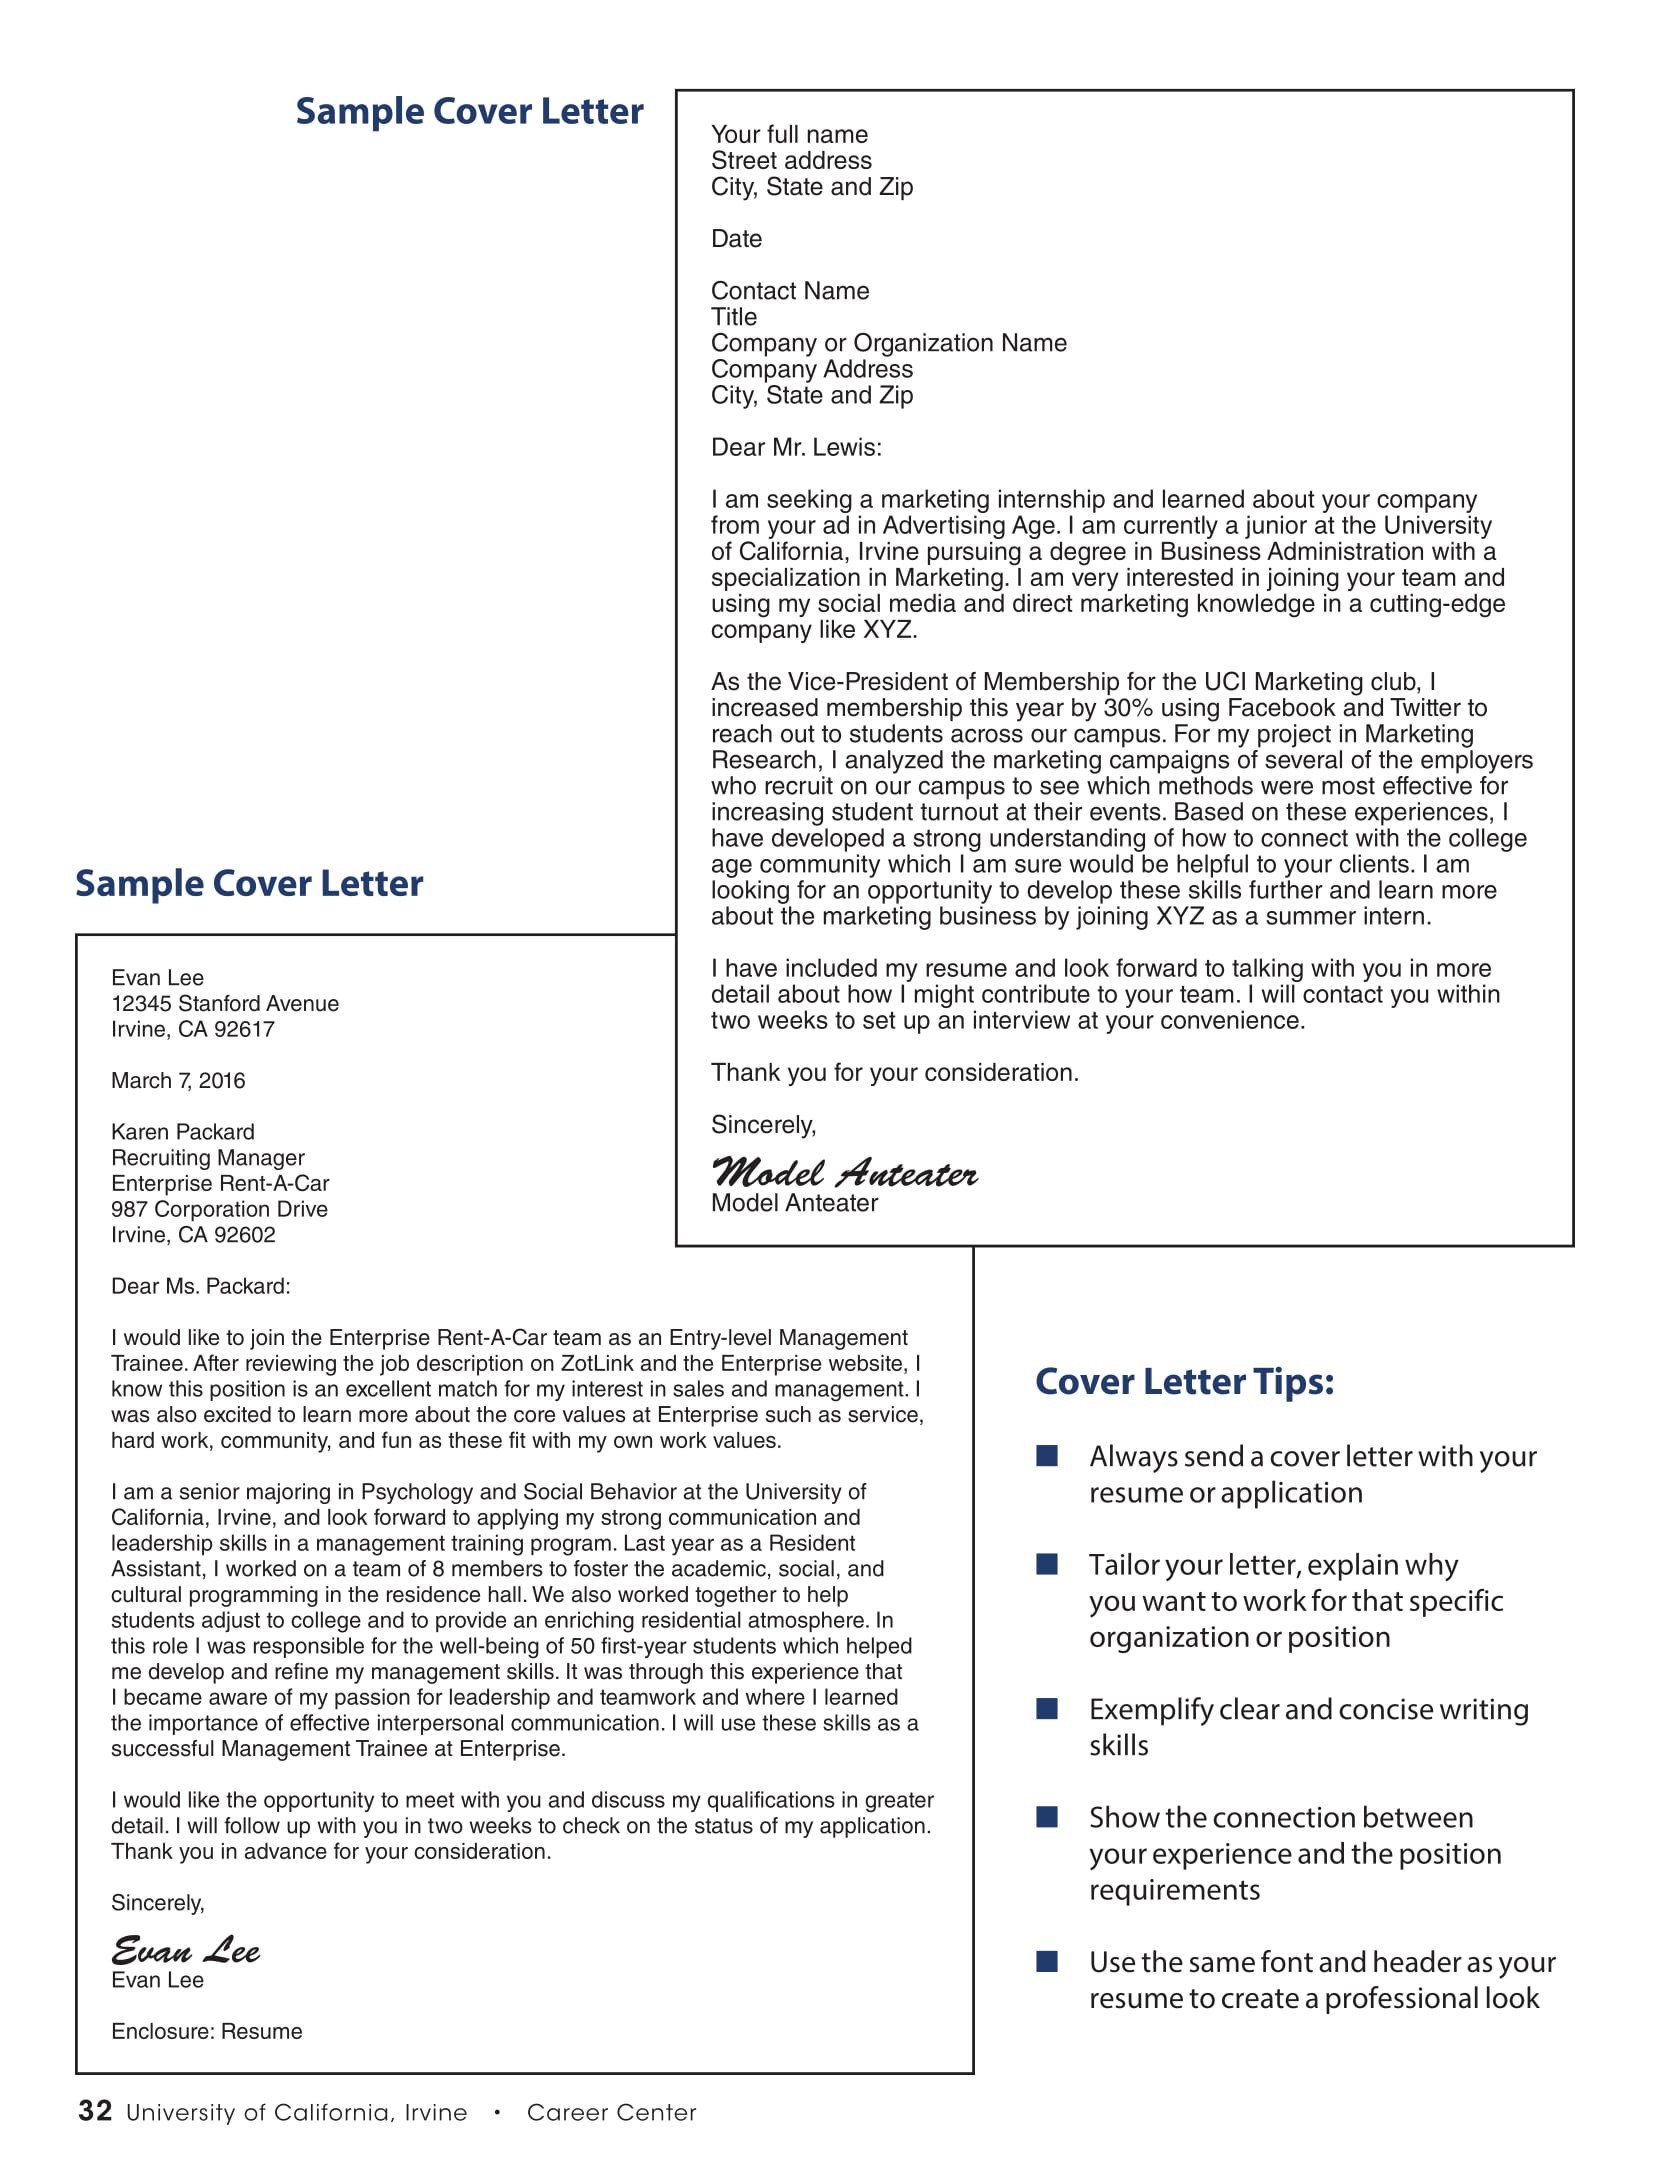 32 Best Sample Cover Letter Examples for Job Applicants